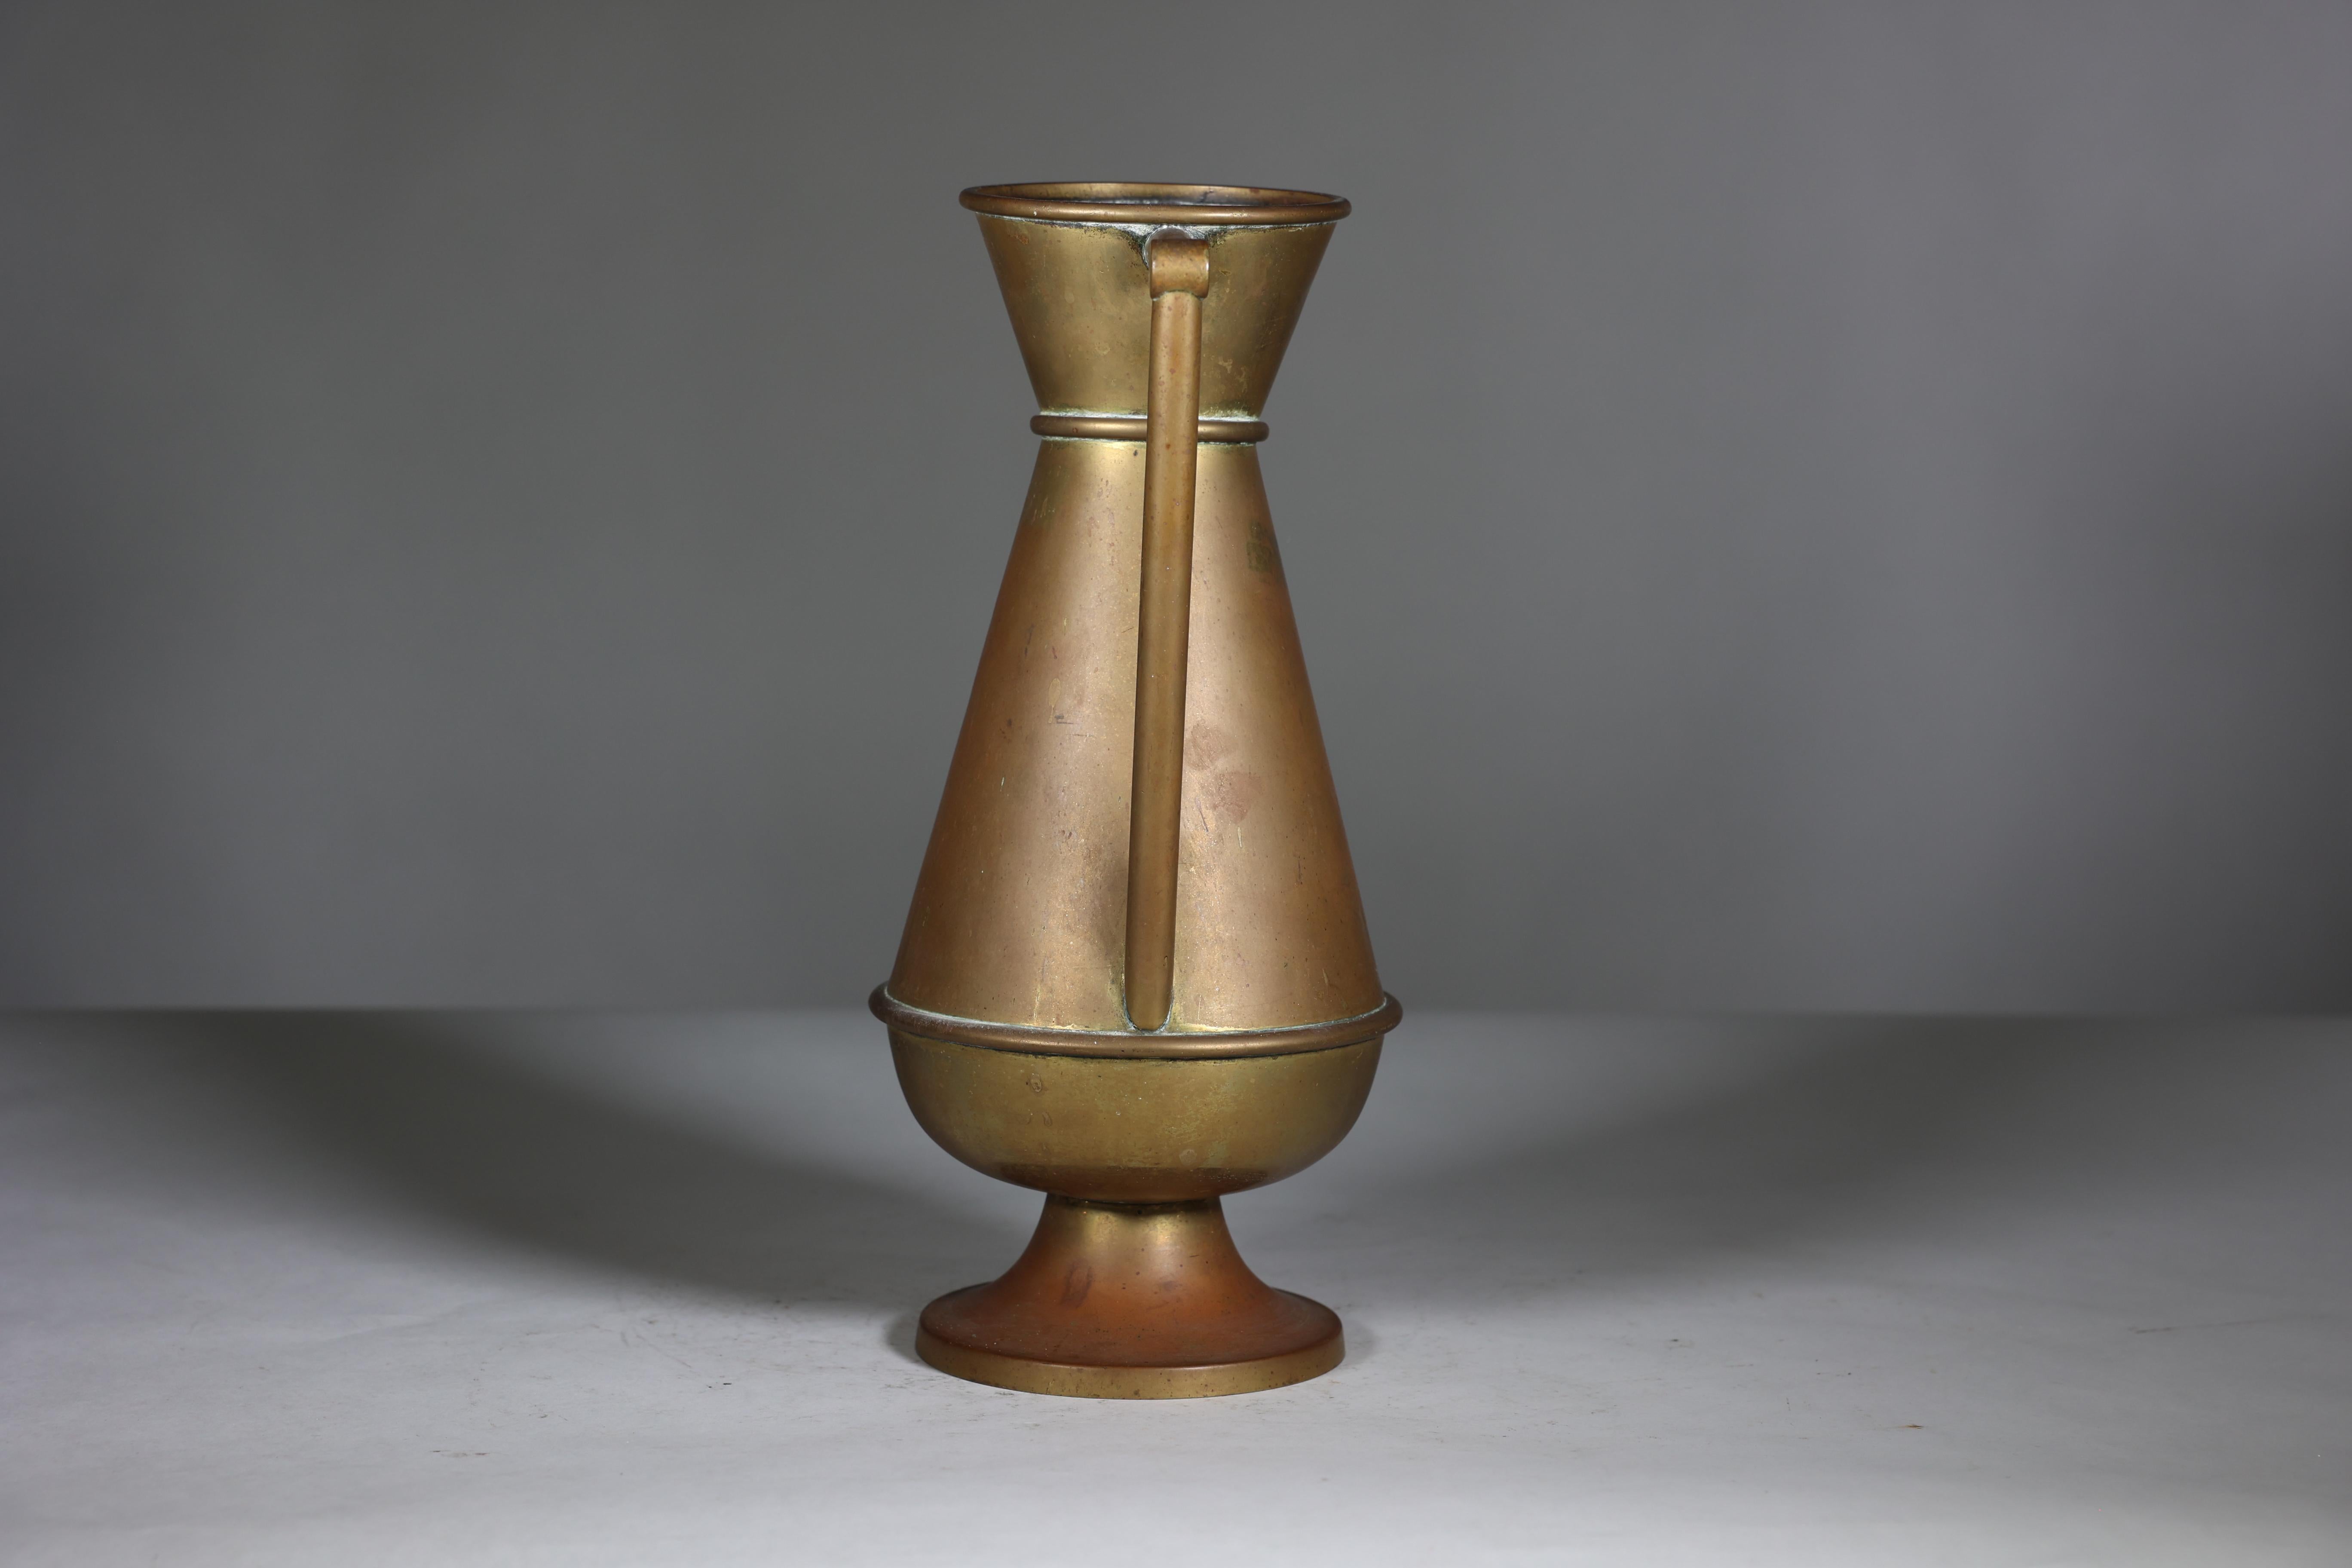 A large Gothic Revival heavy brass jug with a simple angular form that feels well balanced in the hand.